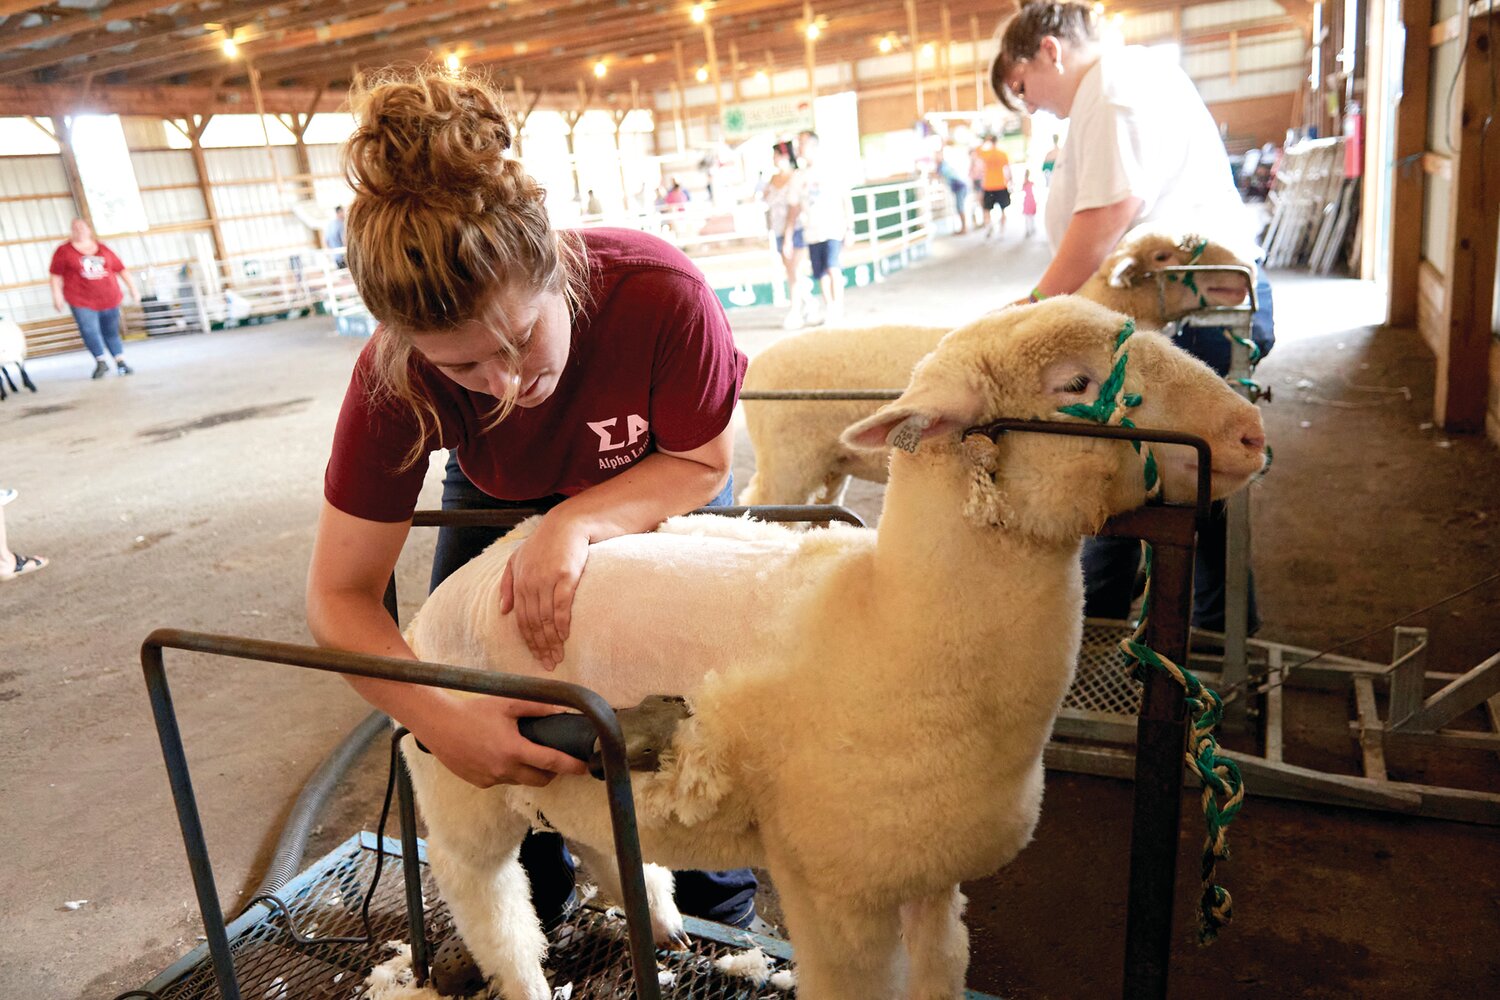 Heather Leatherman, assistant manager of the livestock center at Delaware Valley University, shears  sheep with the help of Emily Cullen at the Middletown Grange Fair Aug. 17.